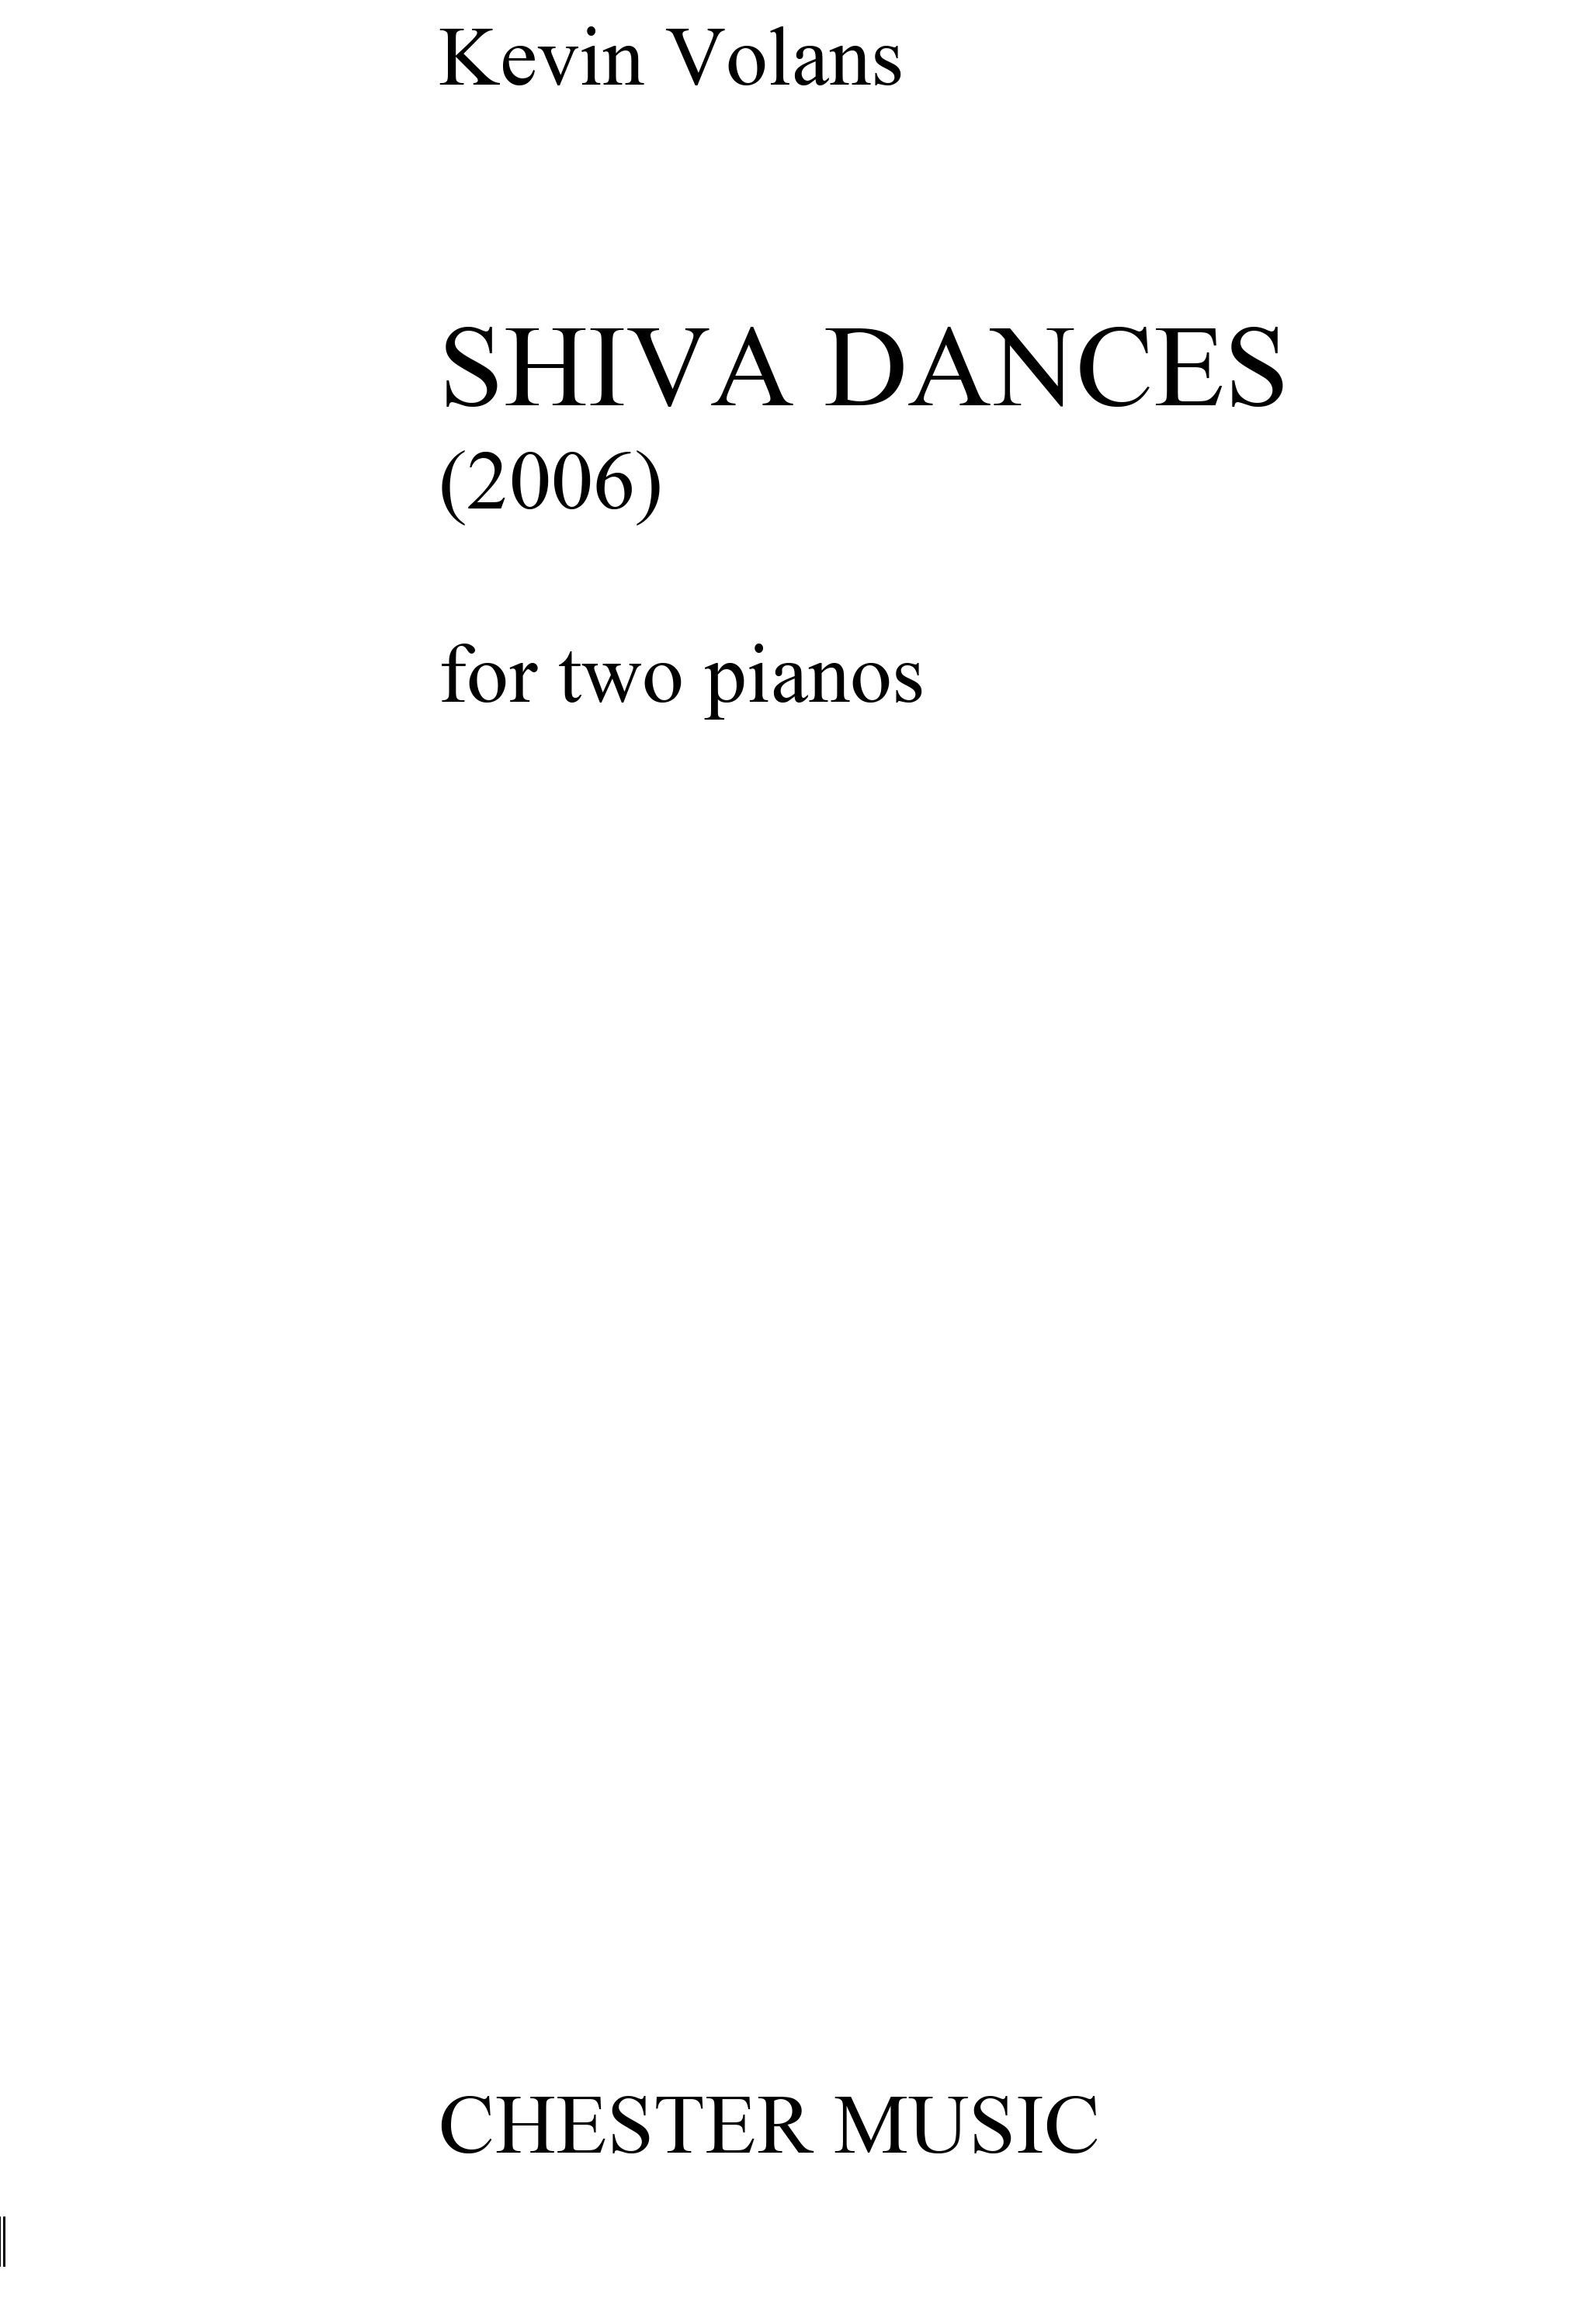 Kevin Volans: Shiva Dances For Two Pianos: Piano Duet: Score